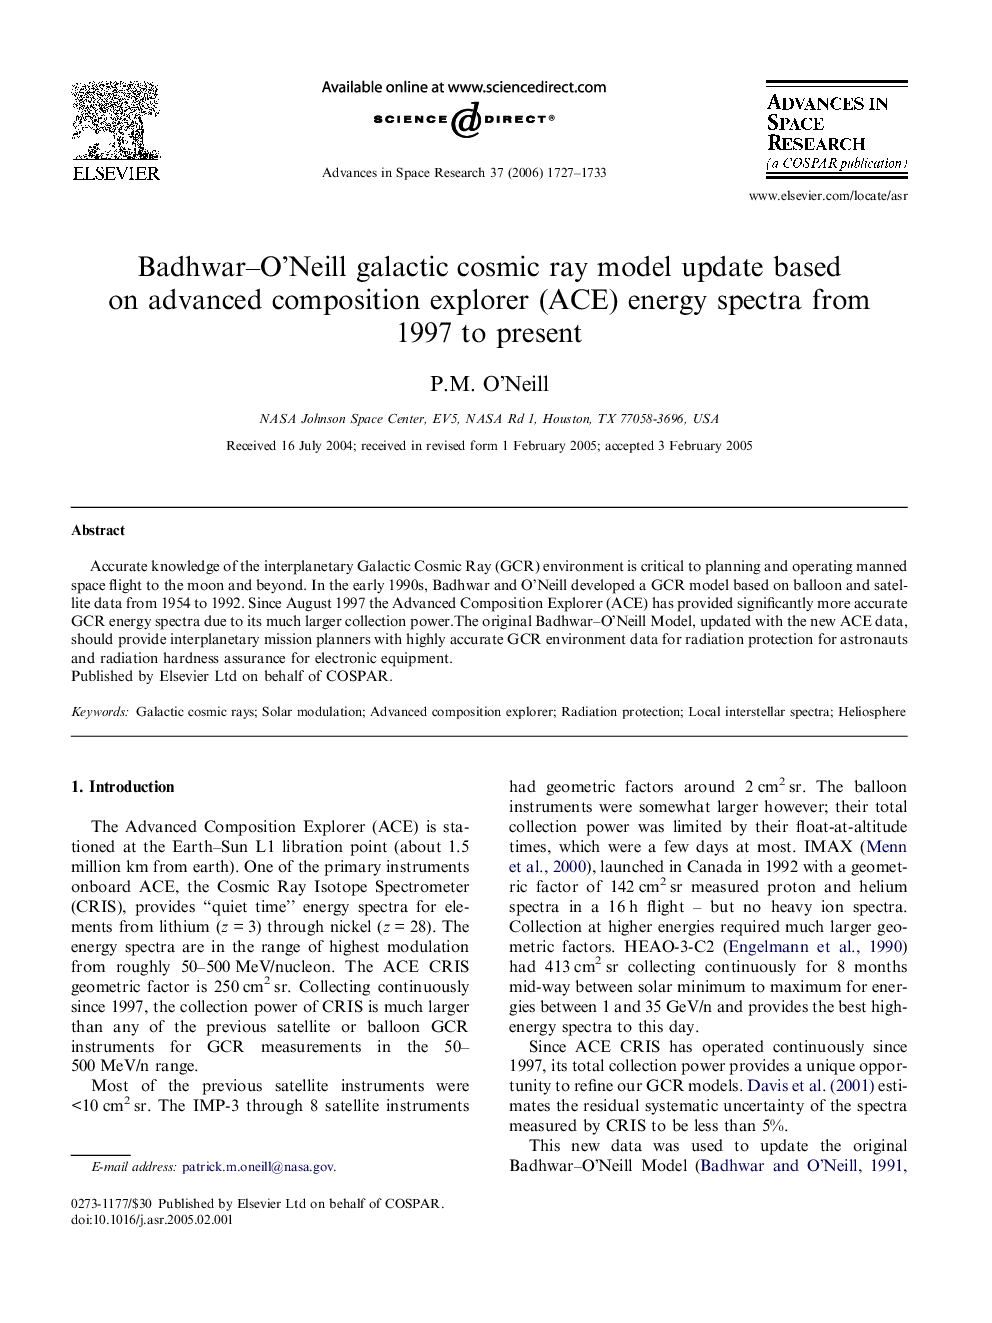 Badhwar–O’Neill galactic cosmic ray model update based on advanced composition explorer (ACE) energy spectra from 1997 to present